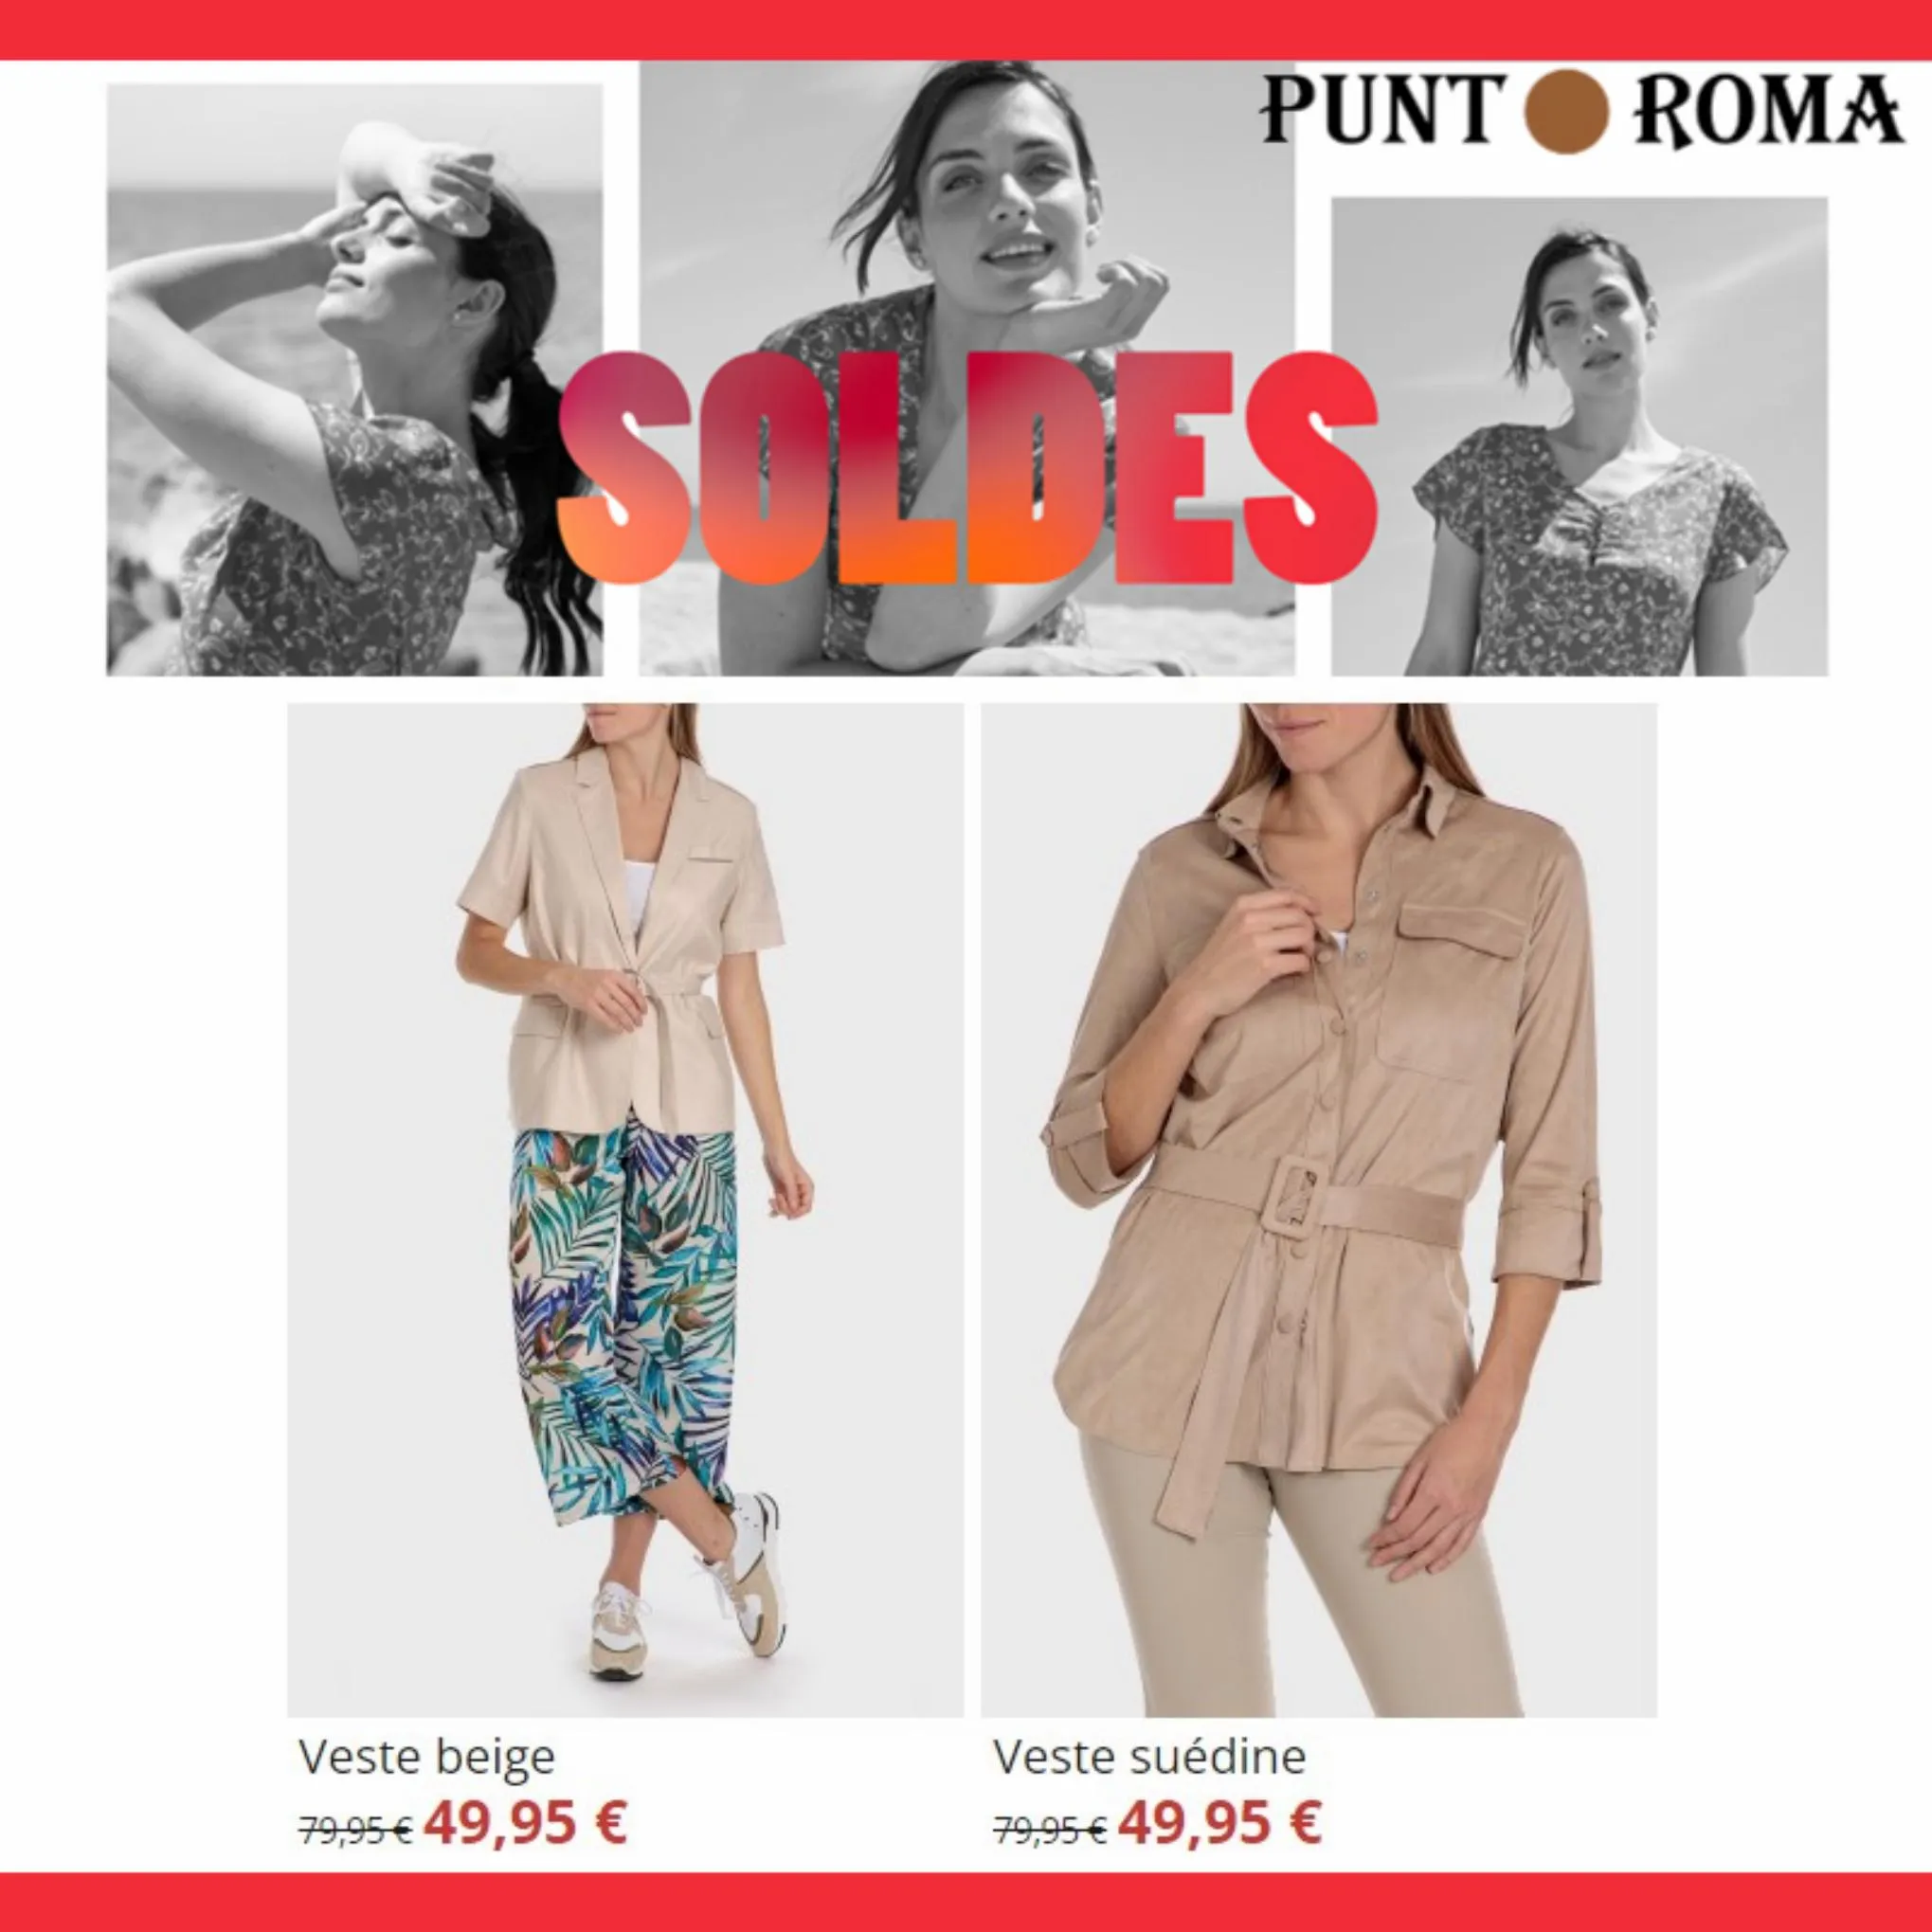 Catalogue Soldes Punt Roma, page 00001